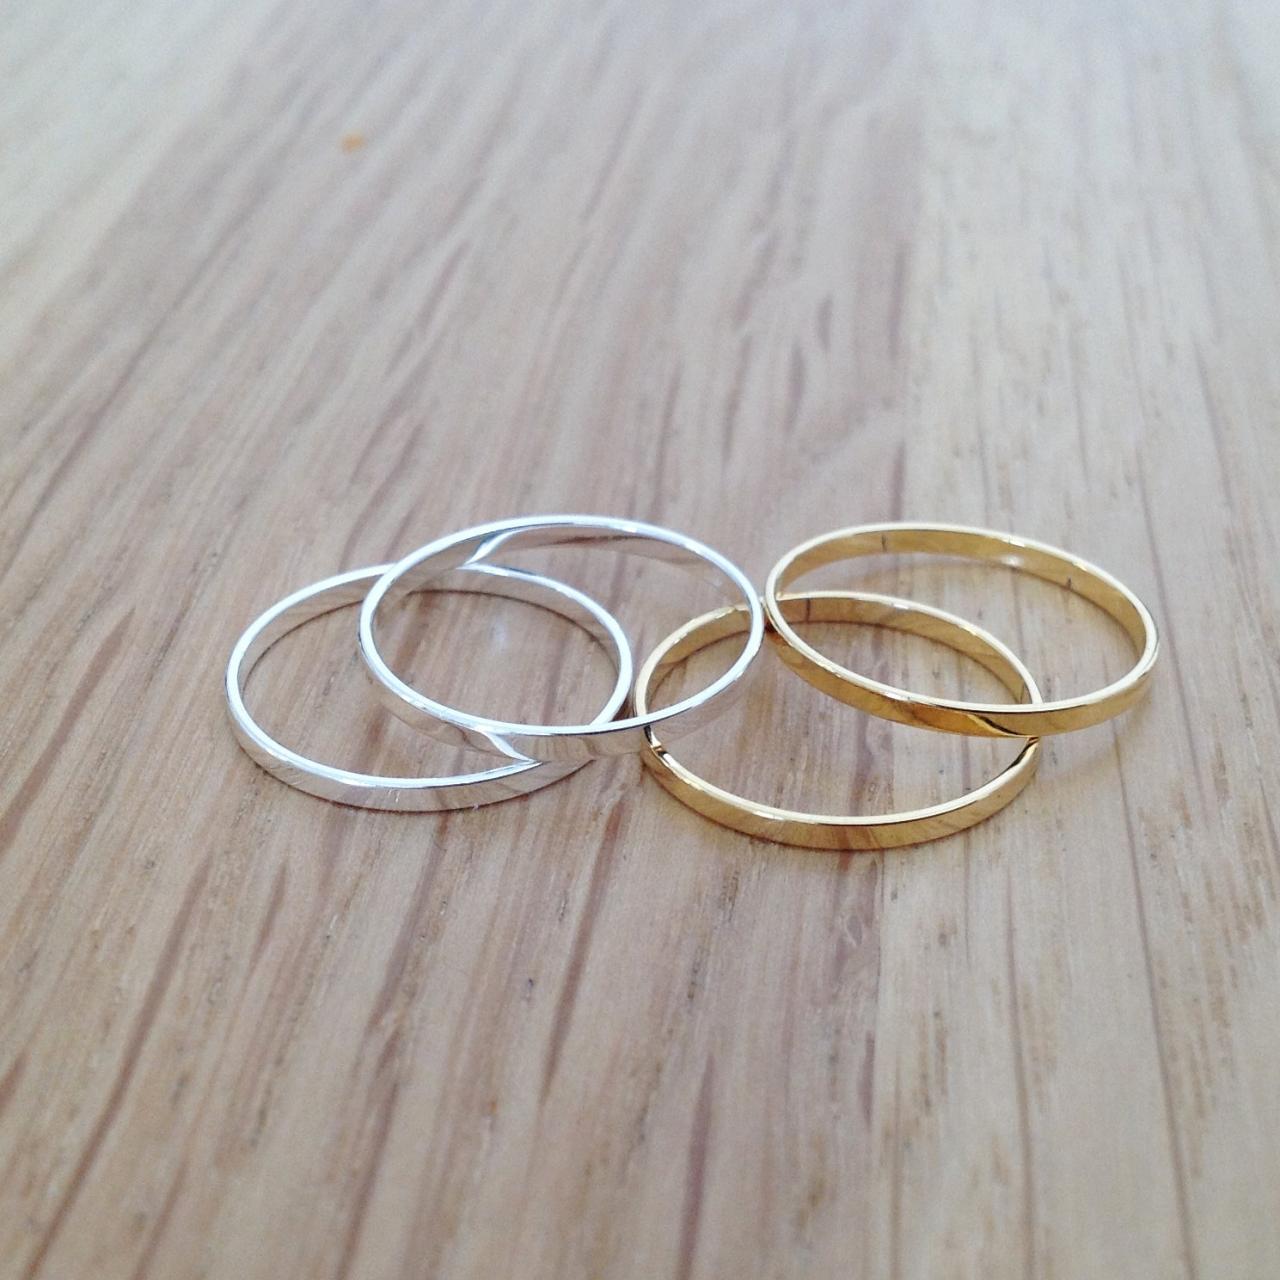 Set Of 4 Rings, Stacking Rings, Knuckle Rings, Thin Rings, Tiny Ring, Stackable Rings, Silver Knuckle Rings A10